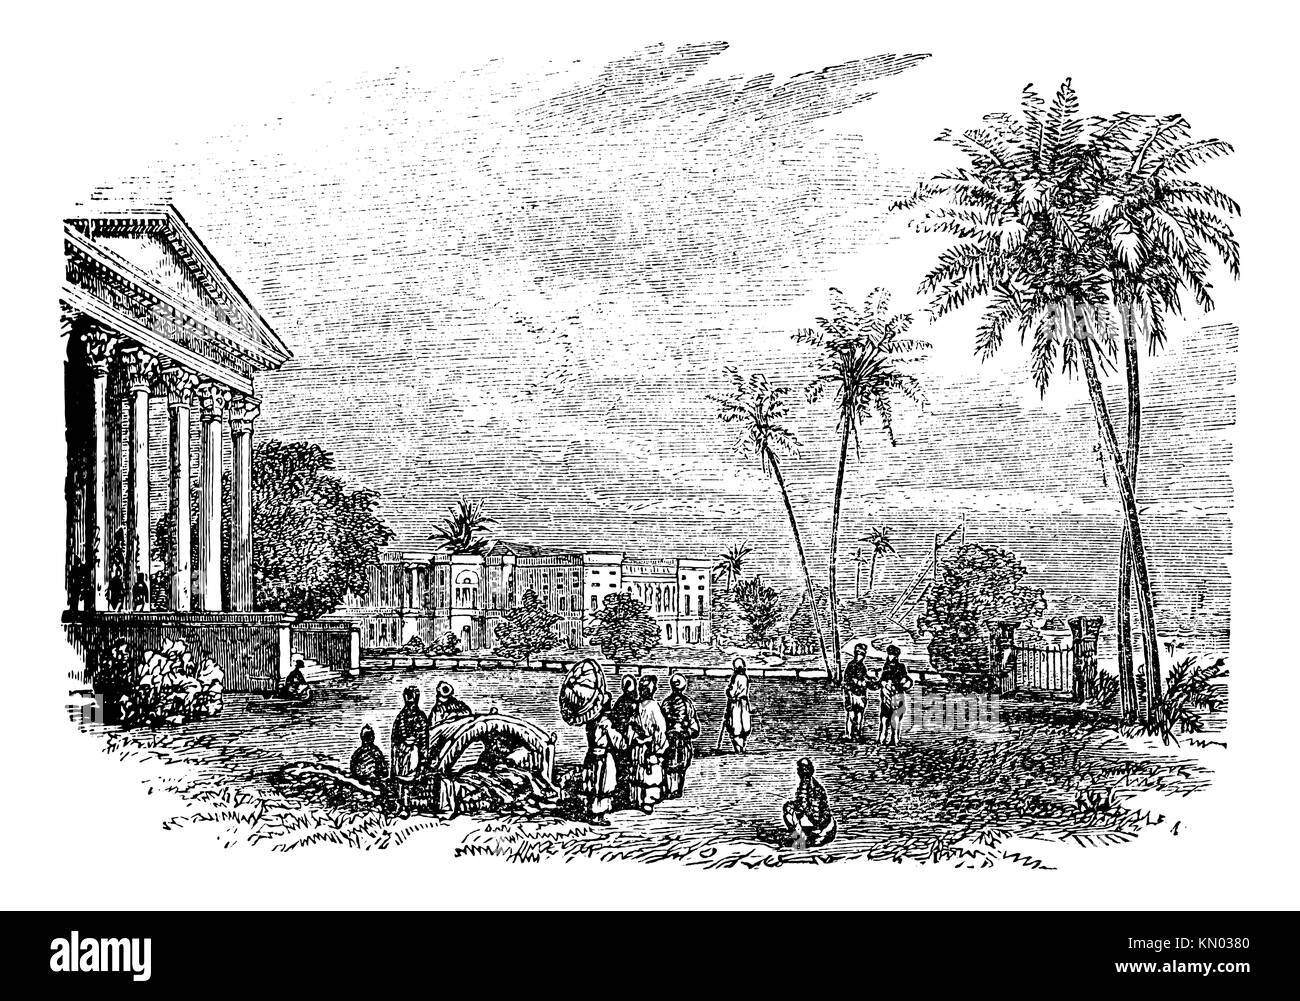 Barrackpore or Barrackpur, in West Bengal, India, during the 1890s, vintage engraving  Old engraved illustration of Barrackpore Stock Photo